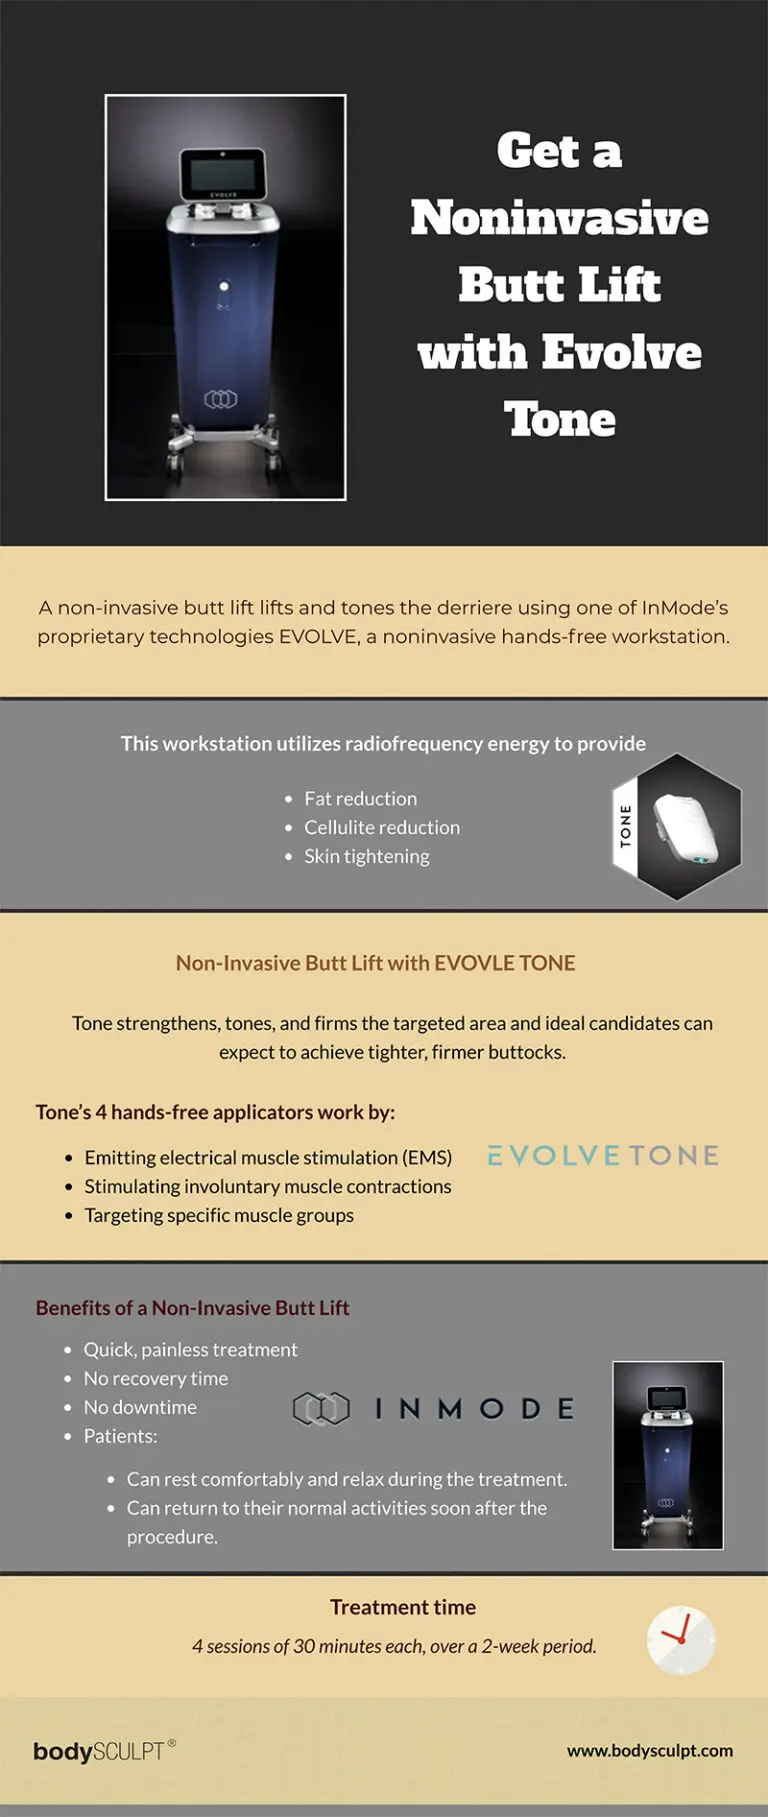 Get a Noninvasive Butt Lift with Evolve Tone [Infographic]